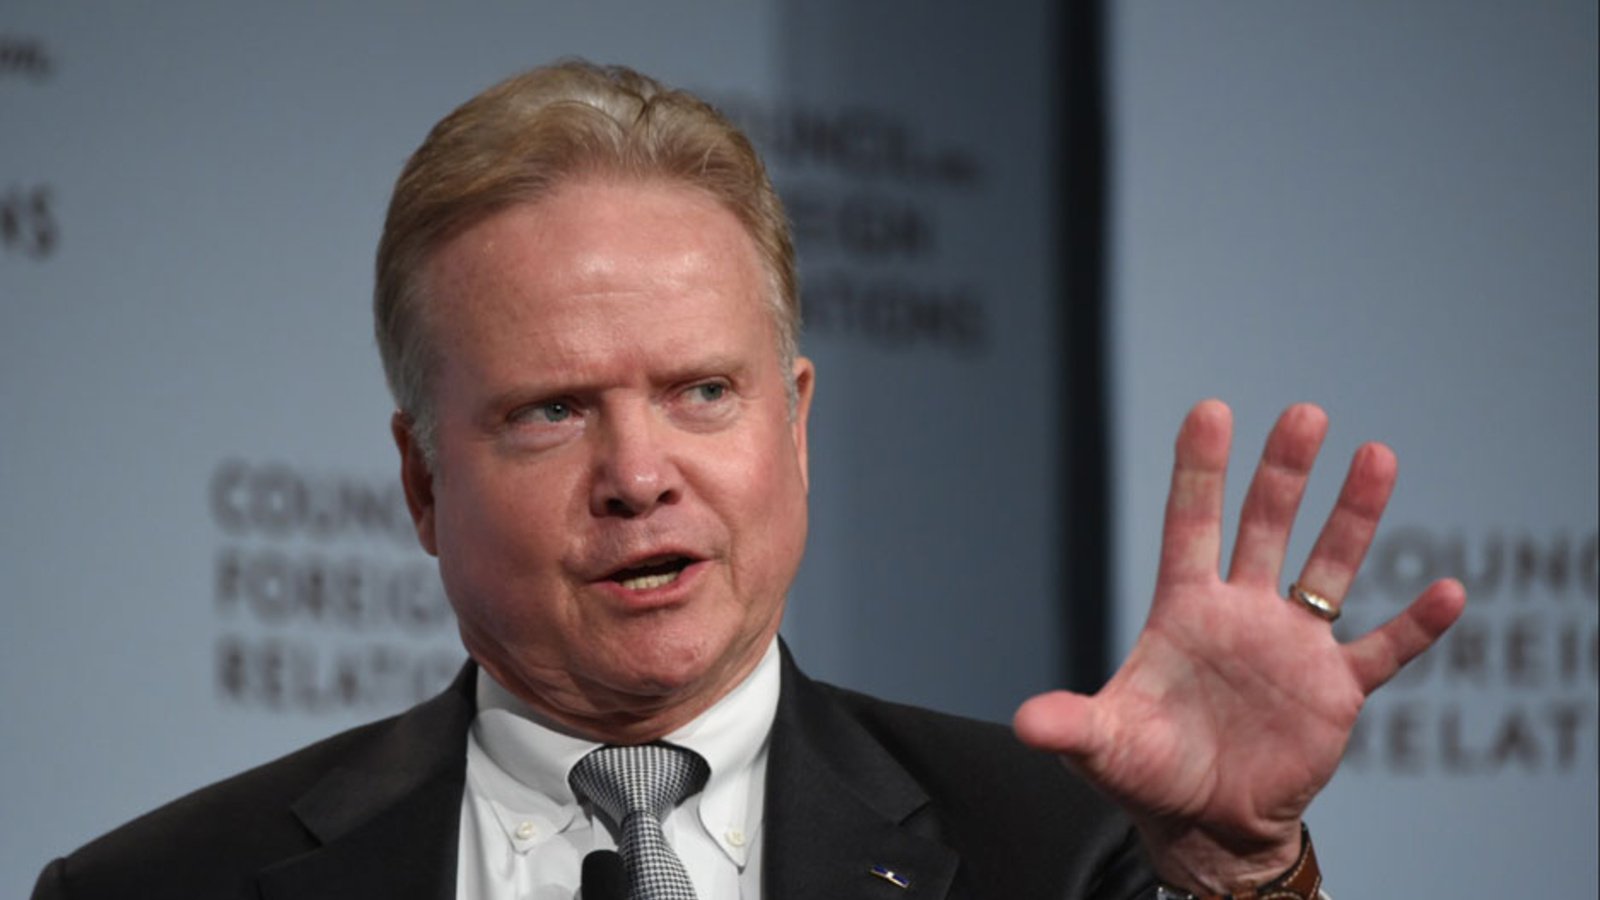 Jim Webb on Foreign Policy | Council on Foreign Relations